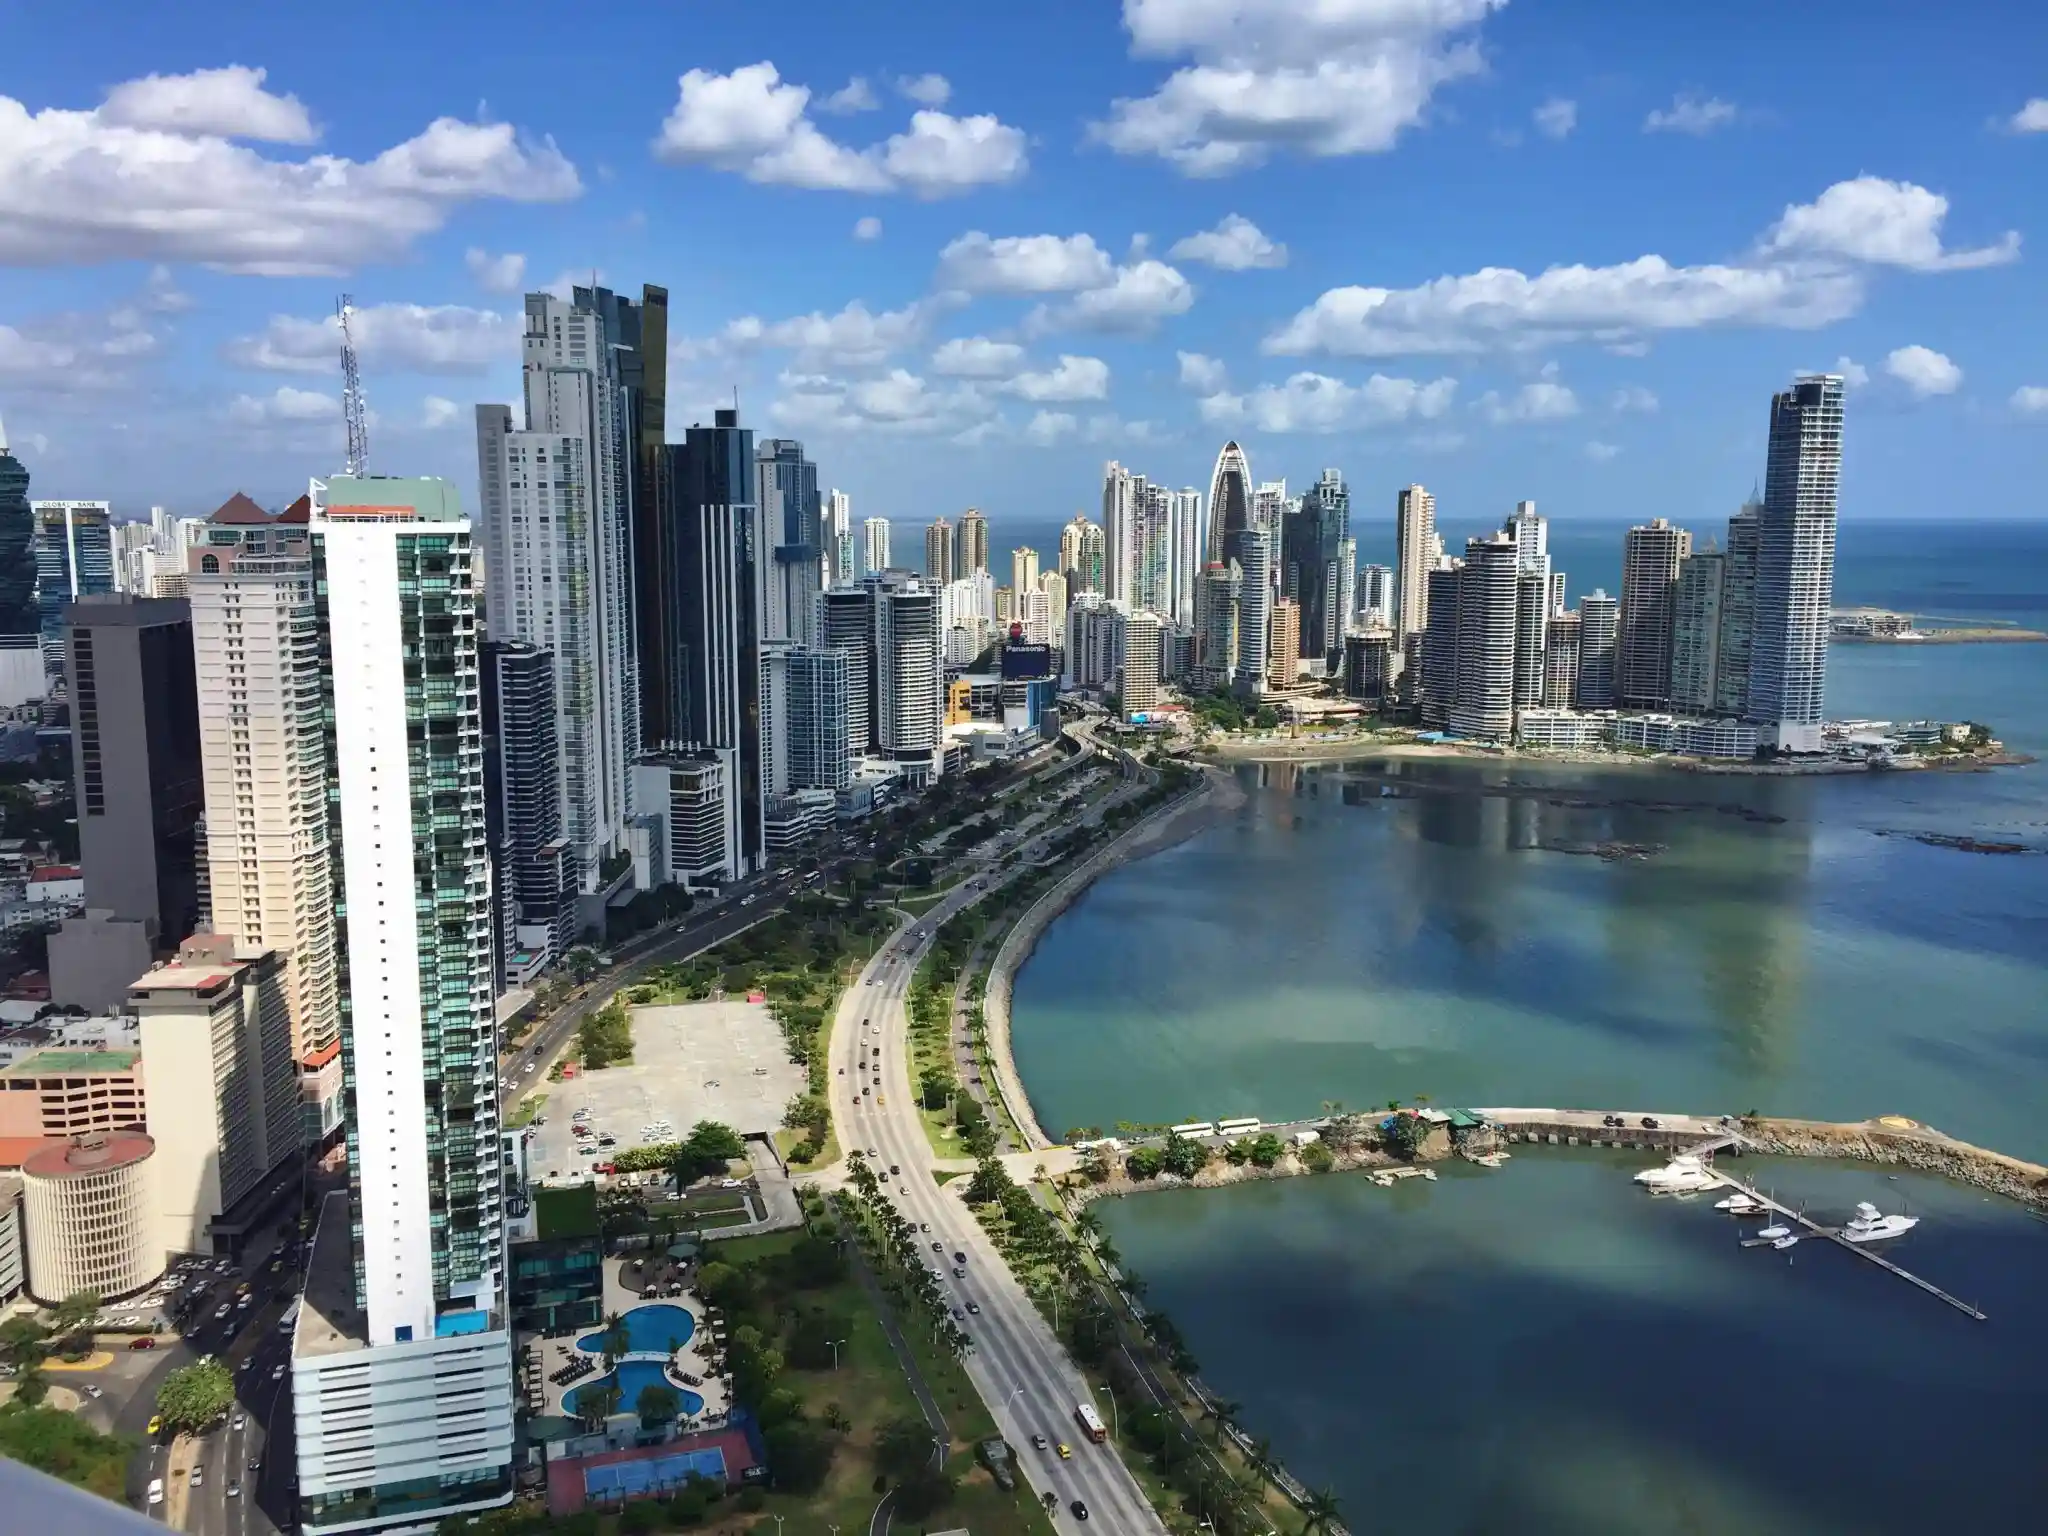 Panama Panama City Panama Central America City Cheapest Places To Travel When You're Young And Broke